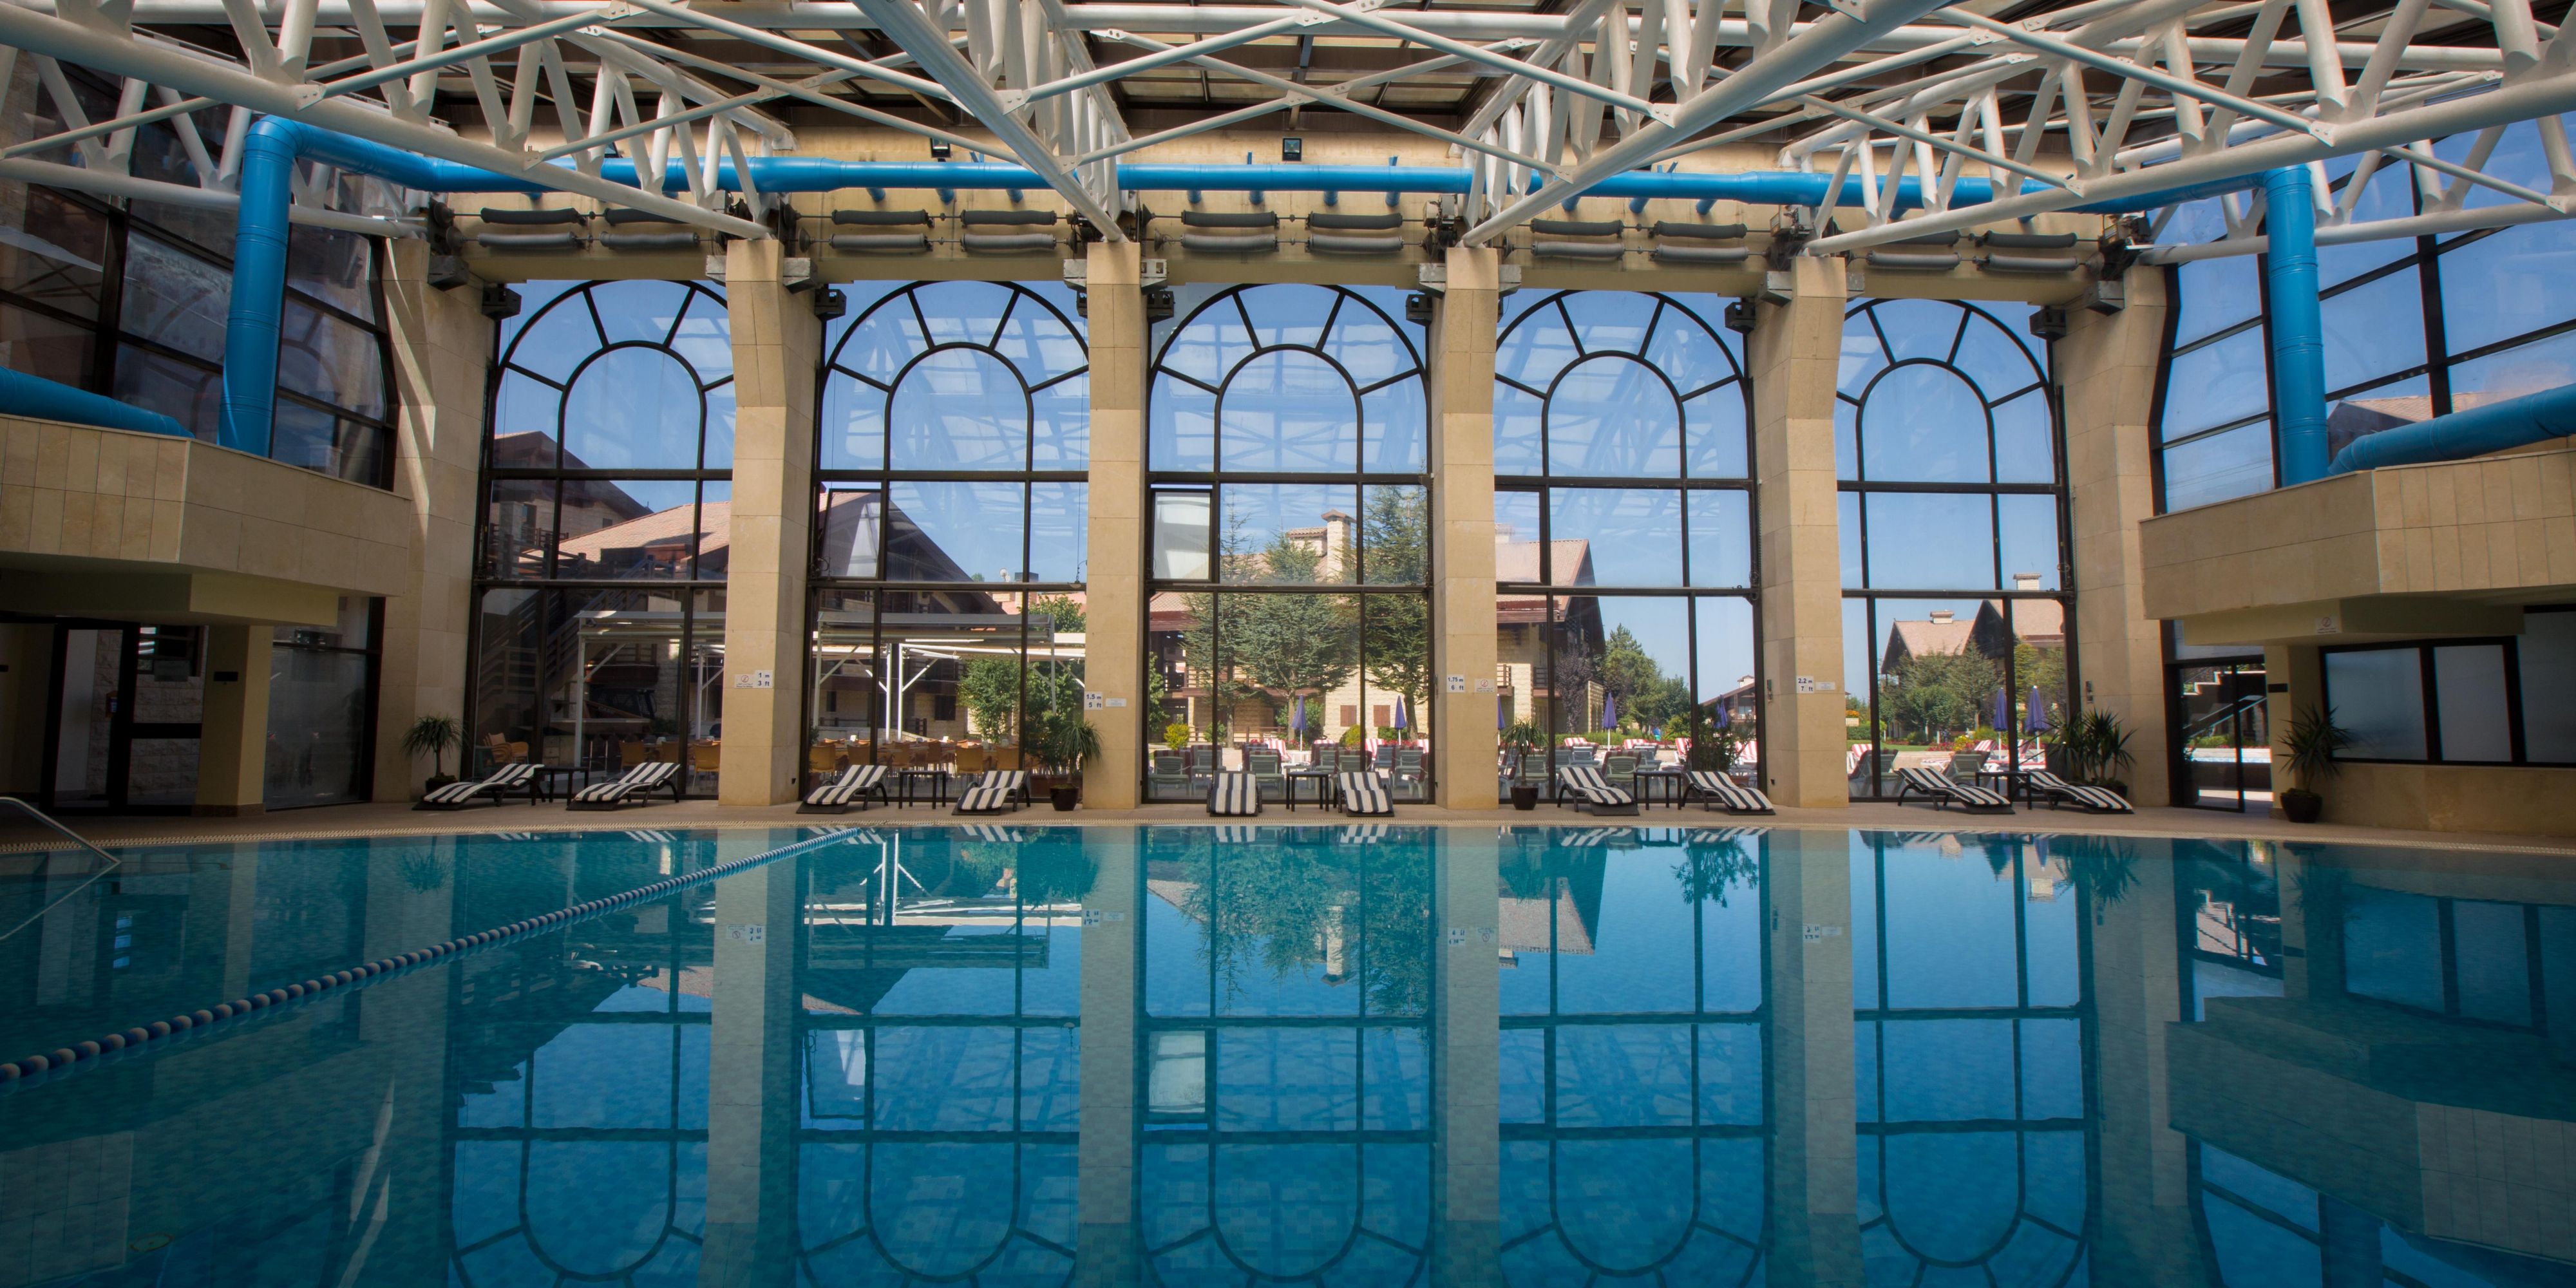 Enjoy the indoor heated pool for young and old.